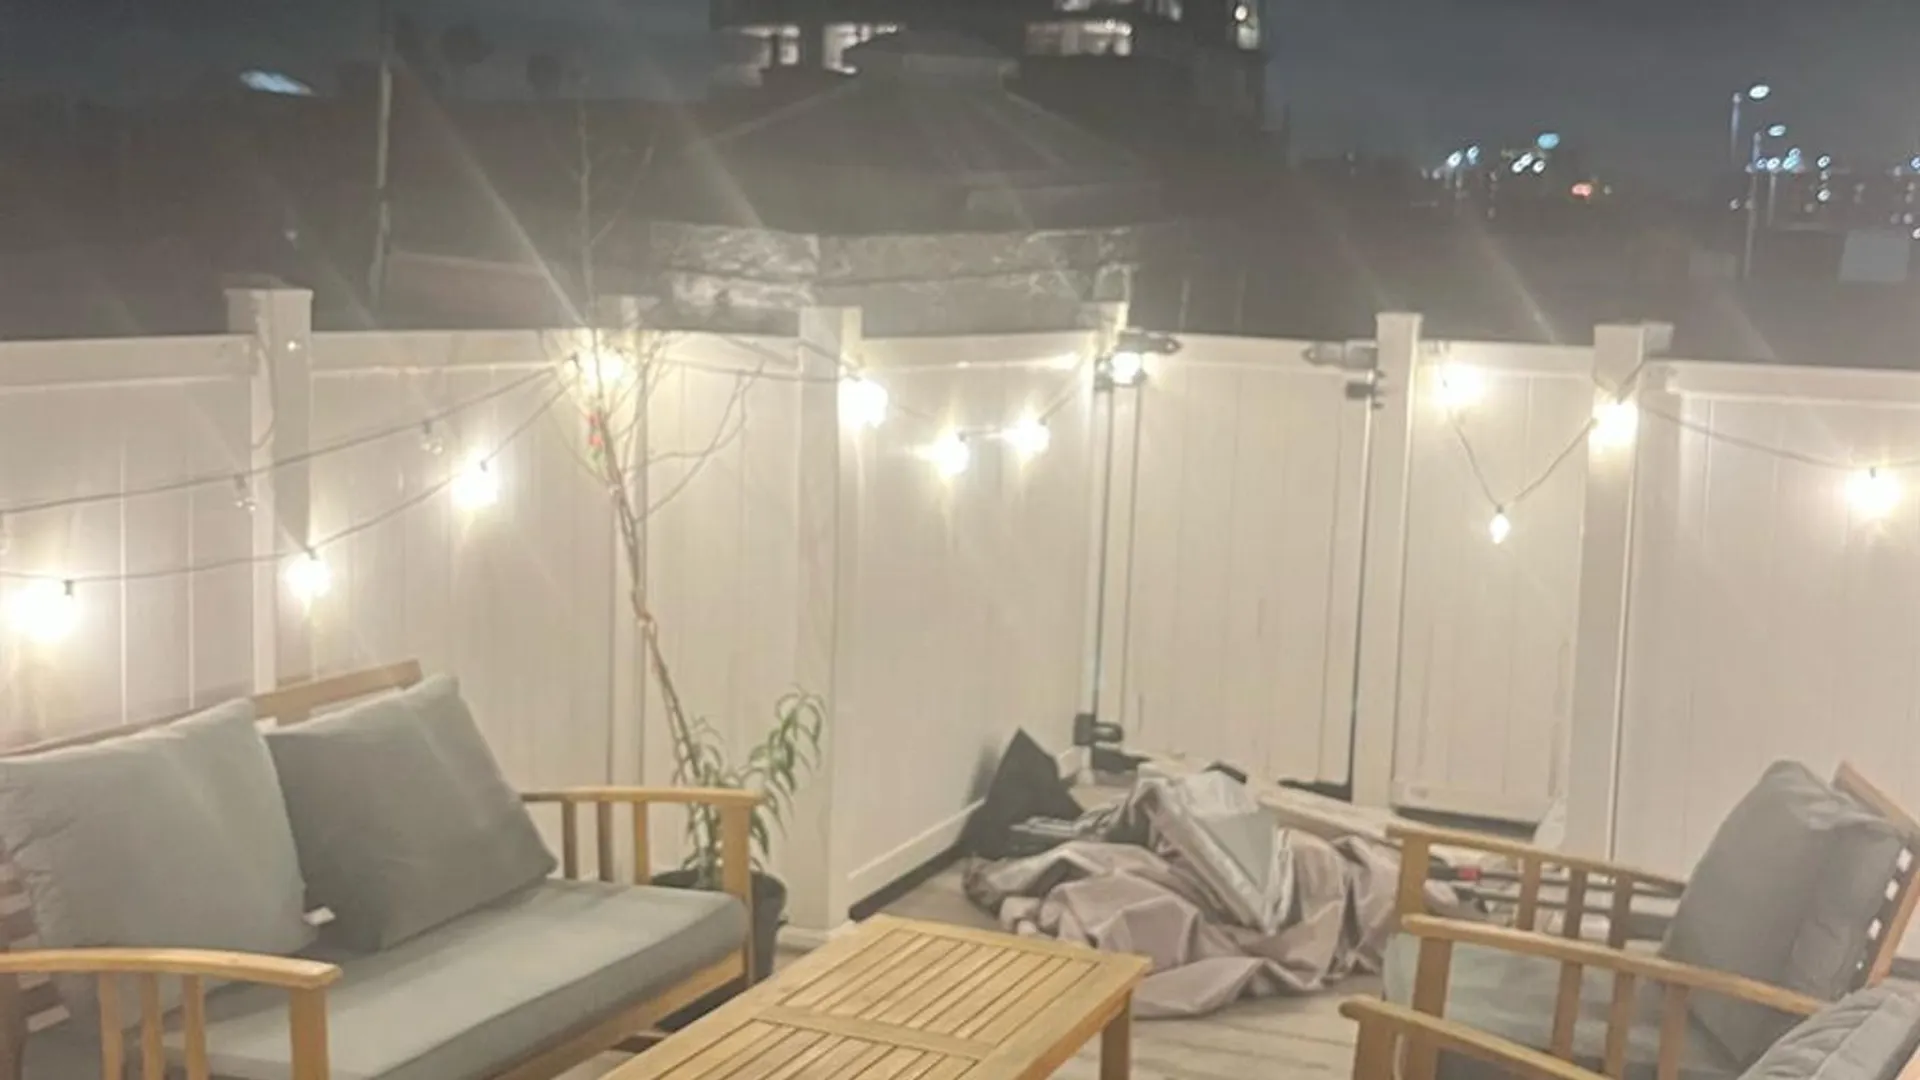 134 Orchard Street, New York, NY 10002, USA | Room for rent